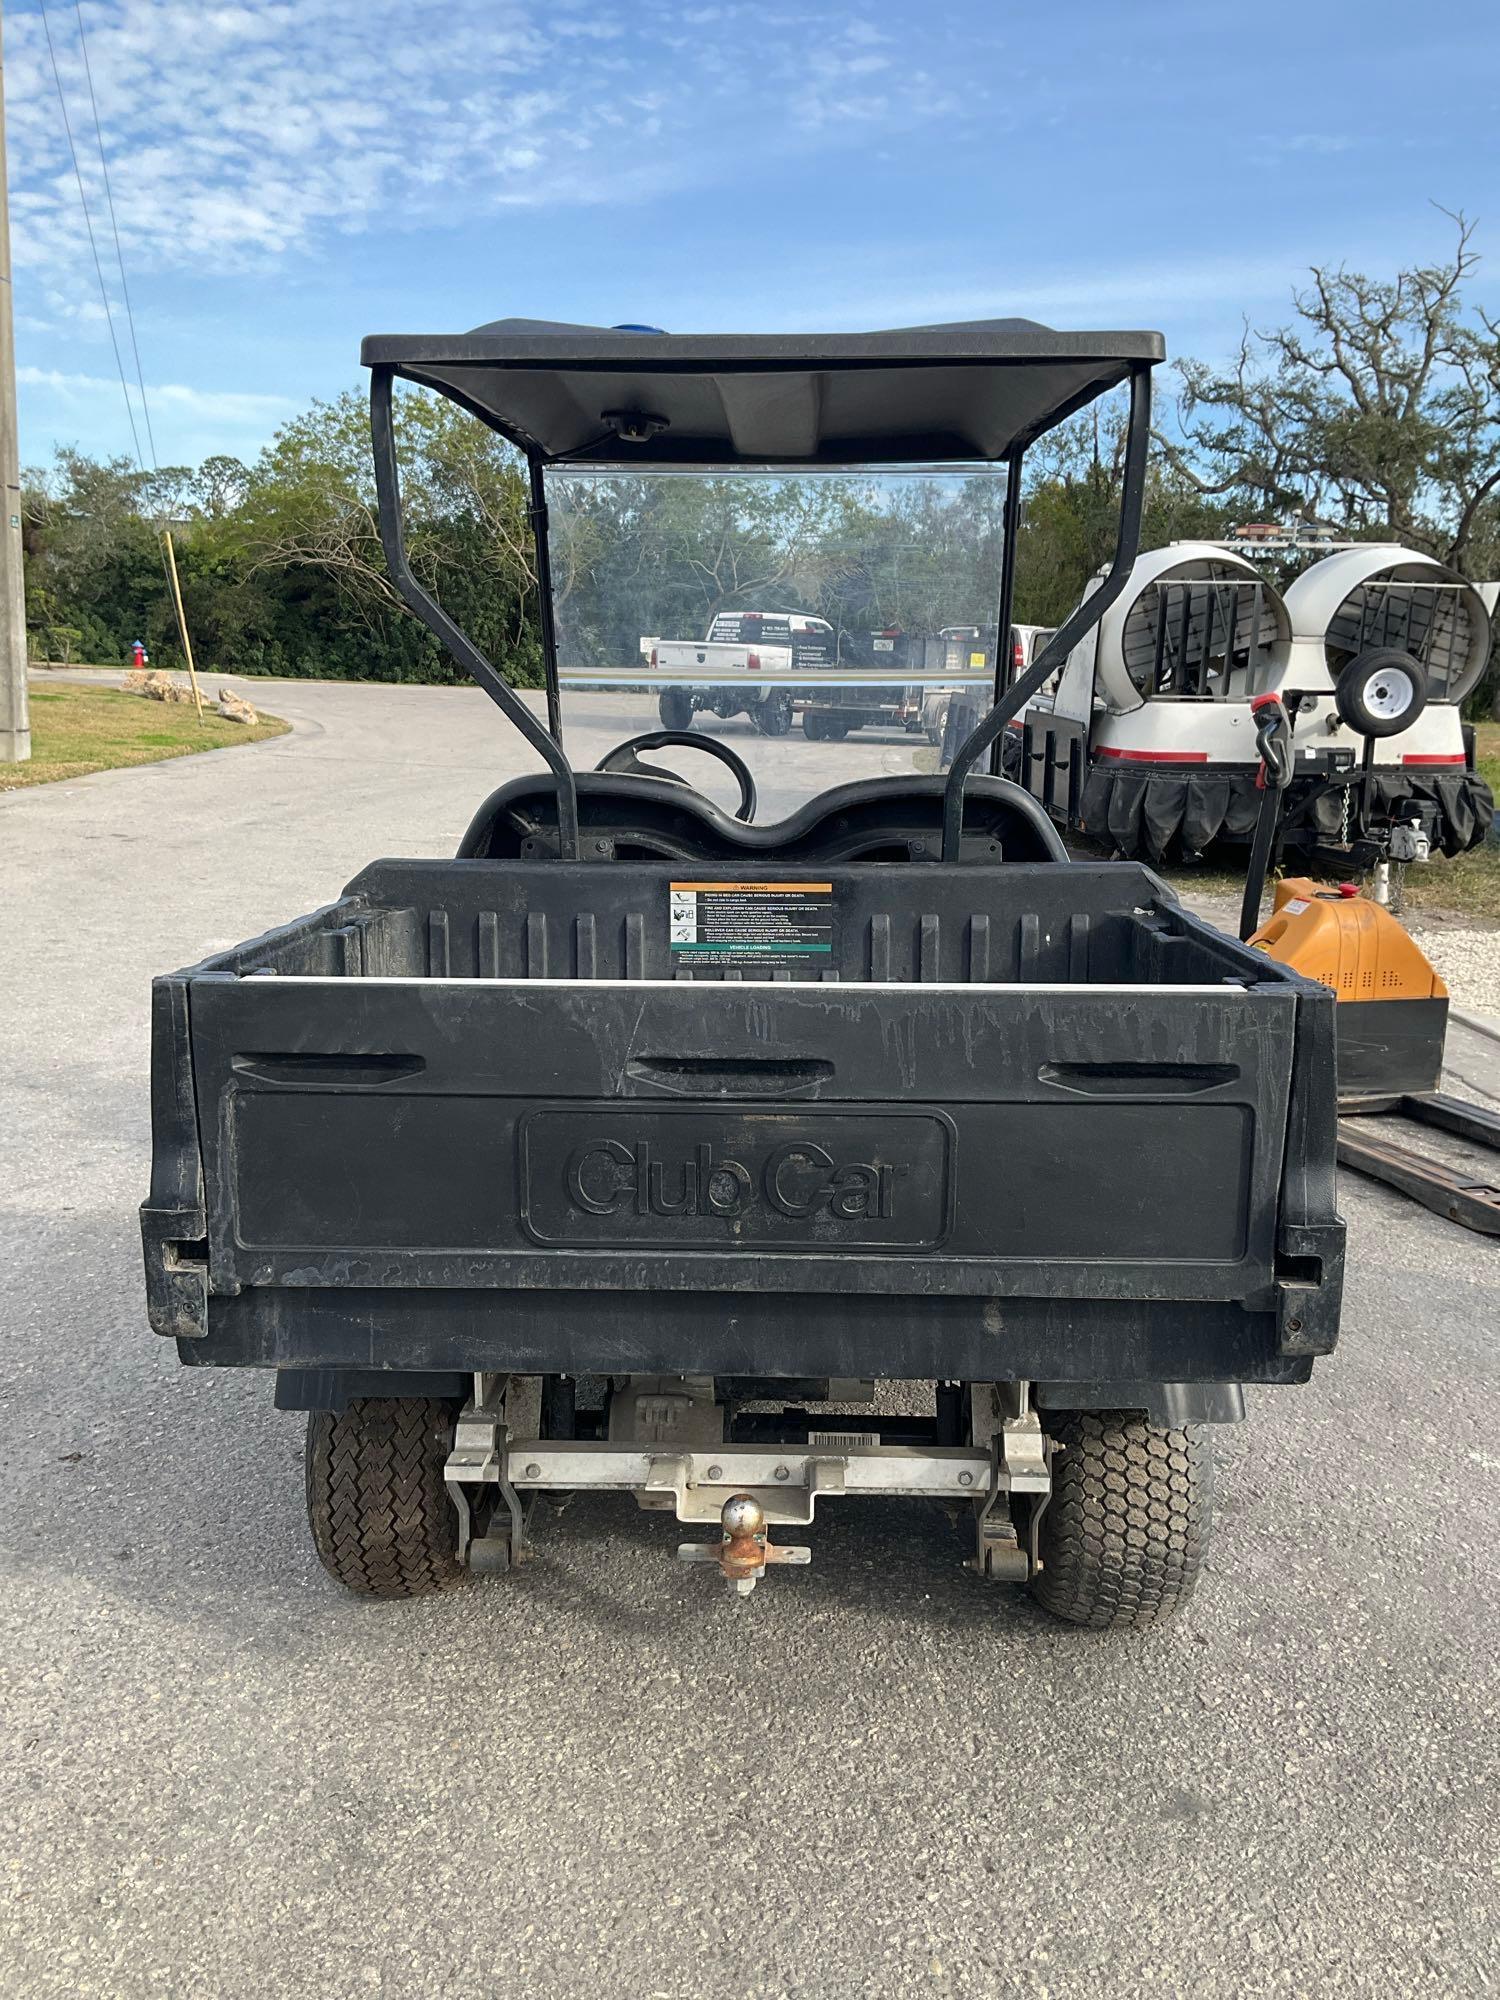 2019 CLUB CAR CARRYALL 100 GOLF CART MODEL FC, ELECTRIC, MANUAL DUMP BED,BILL OF SALE ONLY,